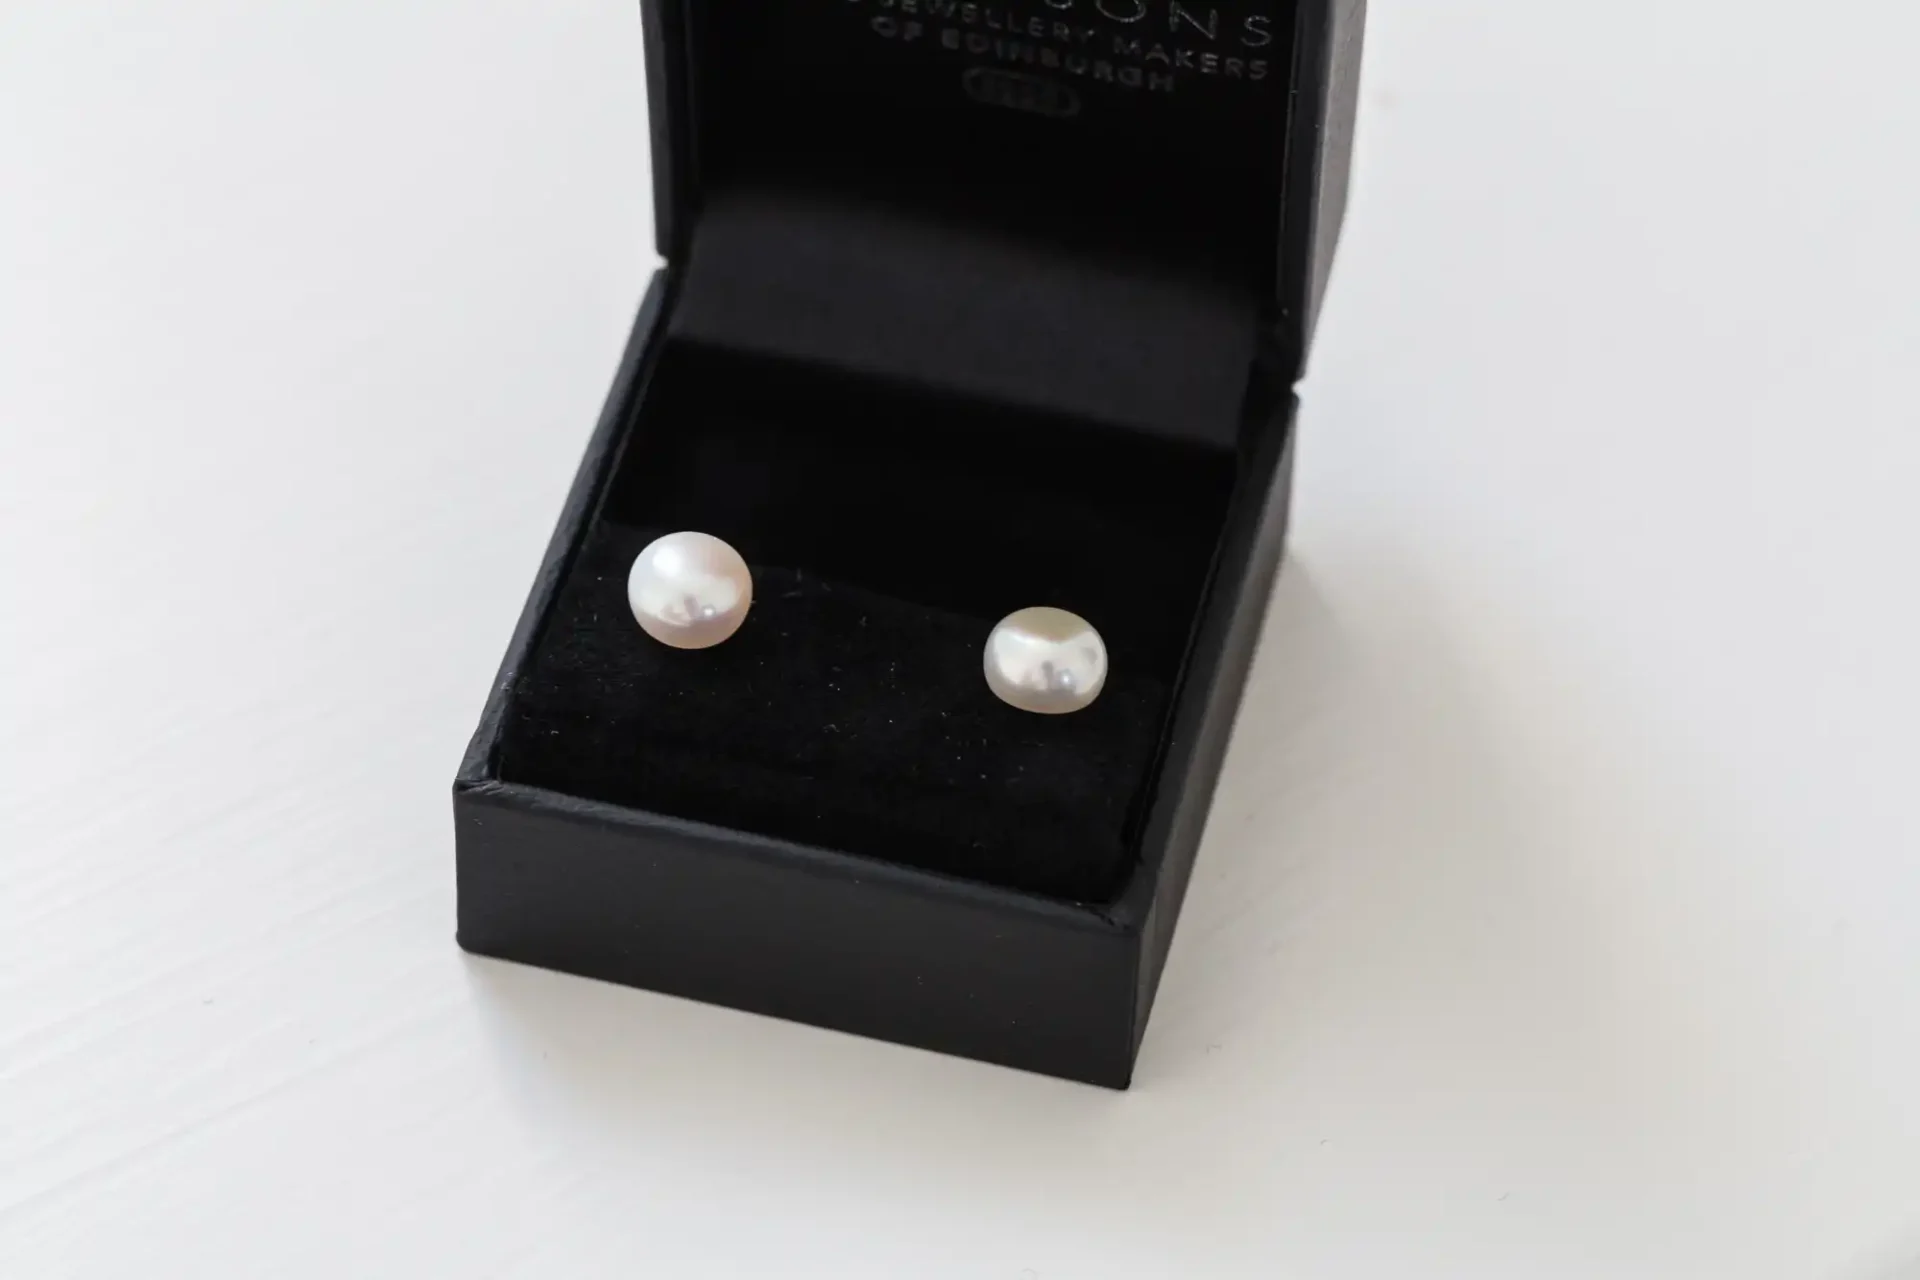 A pair of pearl earrings in an open black jewelry box on a white surface.